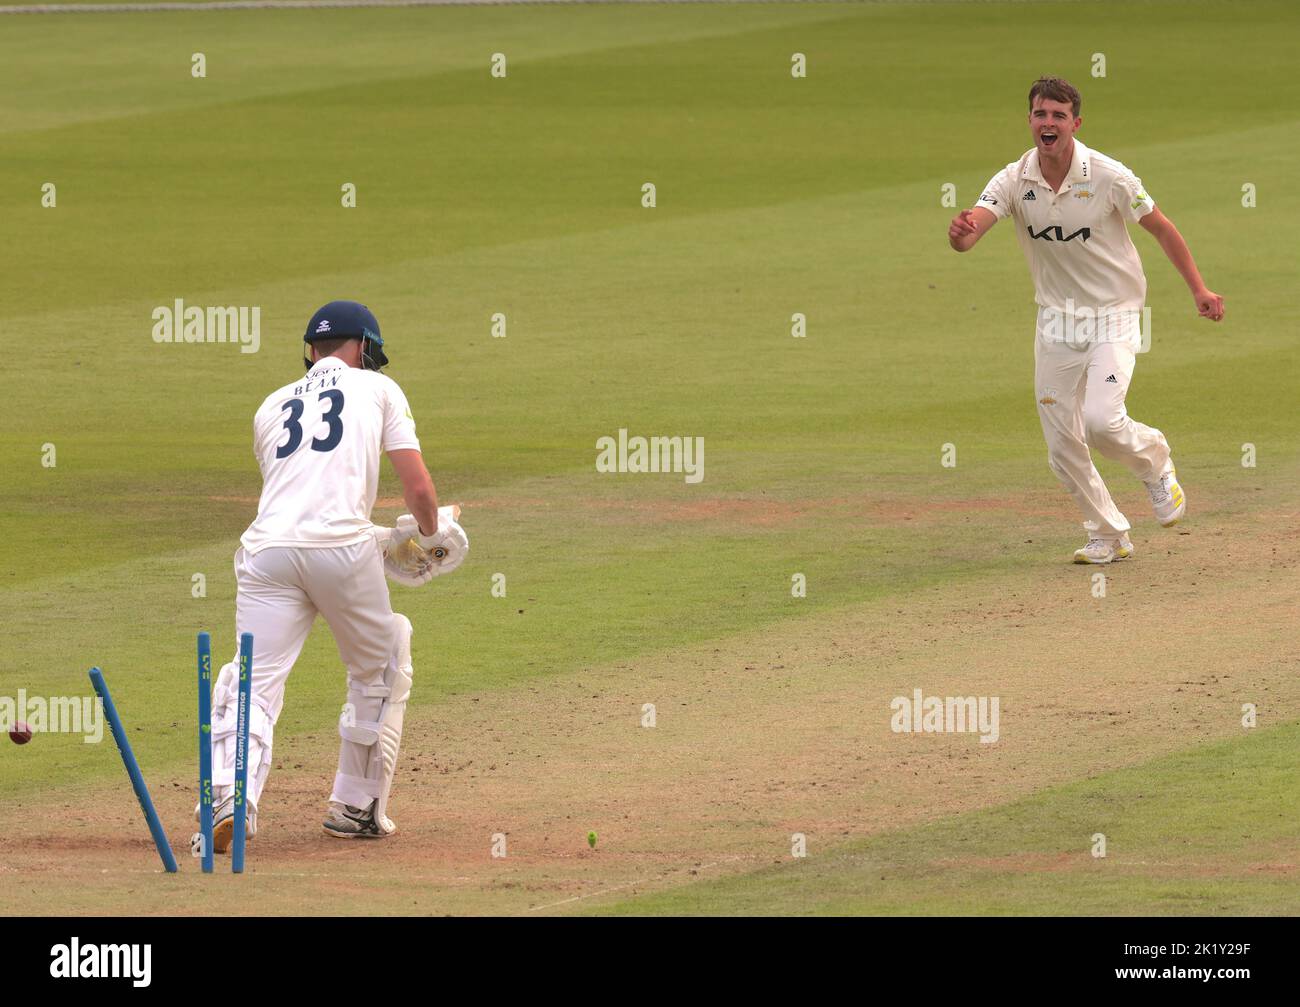 21 September, 2022. London, UK. Yorkshire’s Finlay Bean bowled by Surrey’s Tom Lawes as Surrey take on Yorkshire in the County Championship at the Kia Oval, day two. David Rowe/Alamy Live News Stock Photo